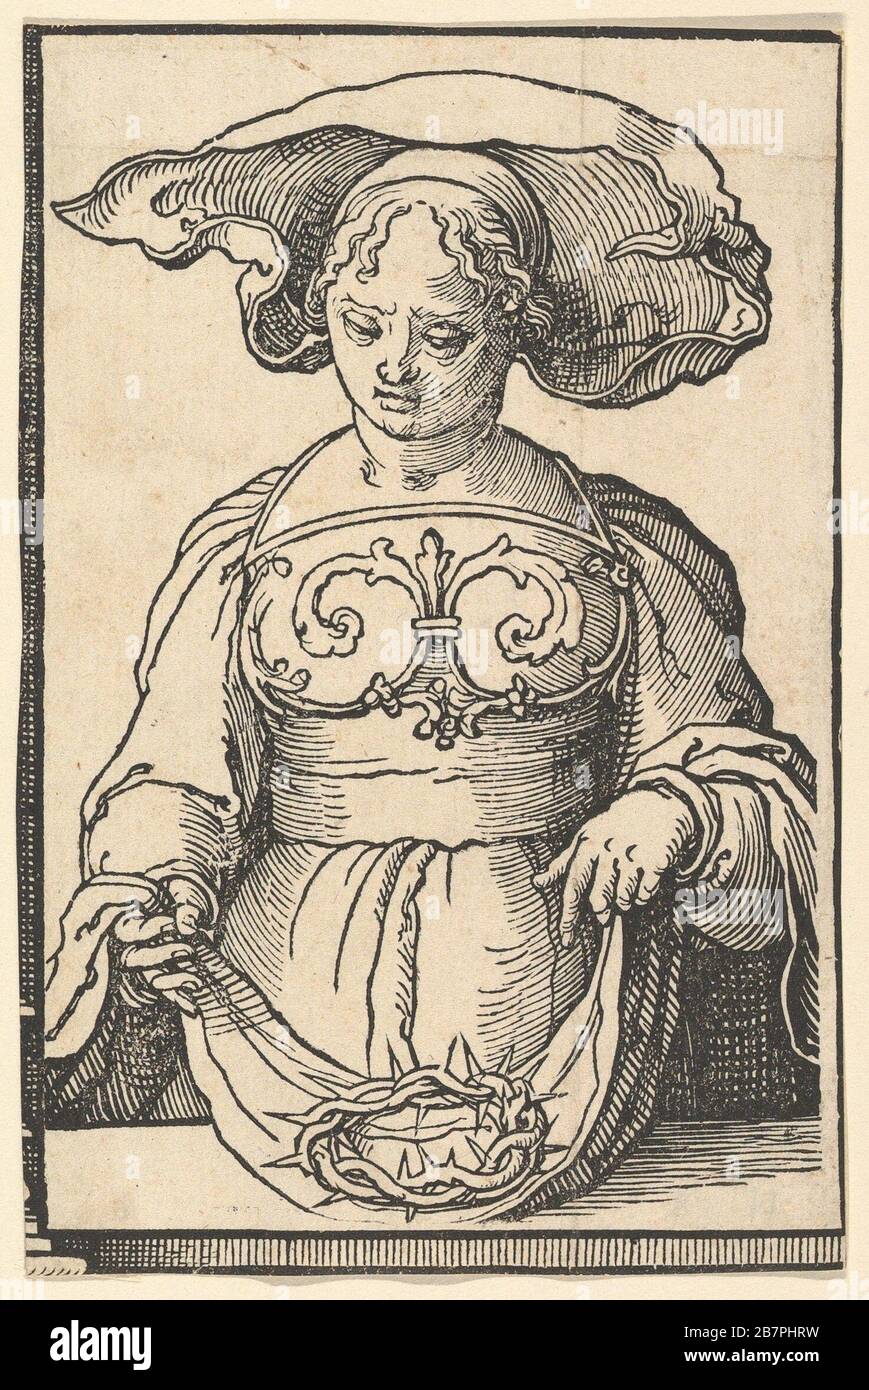 Delphic Sibyl, from the series of Sibyls, ca. 1530. Stock Photo